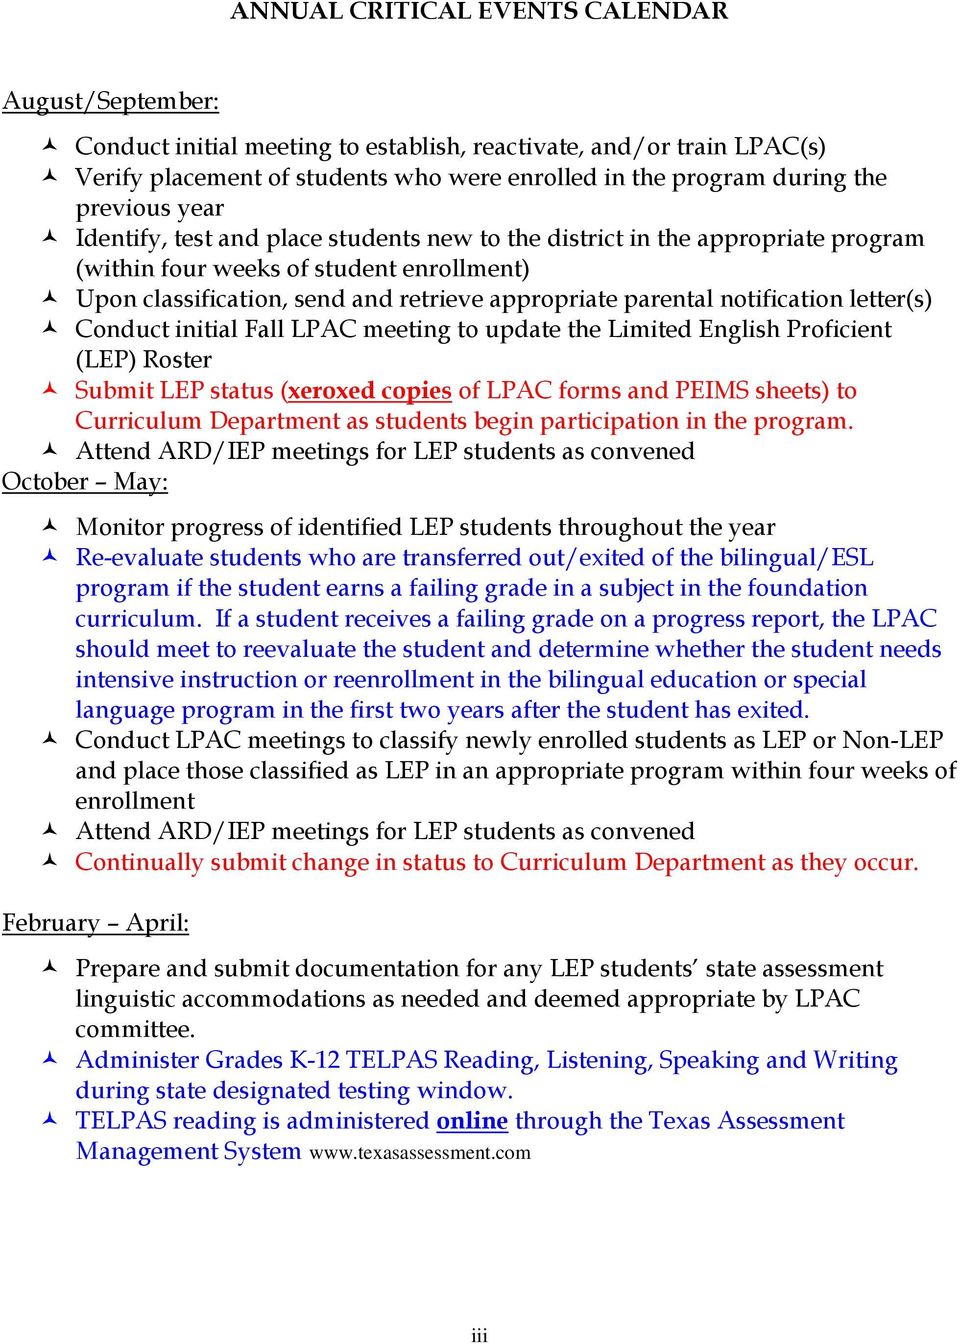 notification letter(s) Conduct initial Fall LPAC meeting to update the Limited English Proficient (LEP) Roster Submit LEP status (xeroxed copies of LPAC forms and PEIMS sheets) to Curriculum